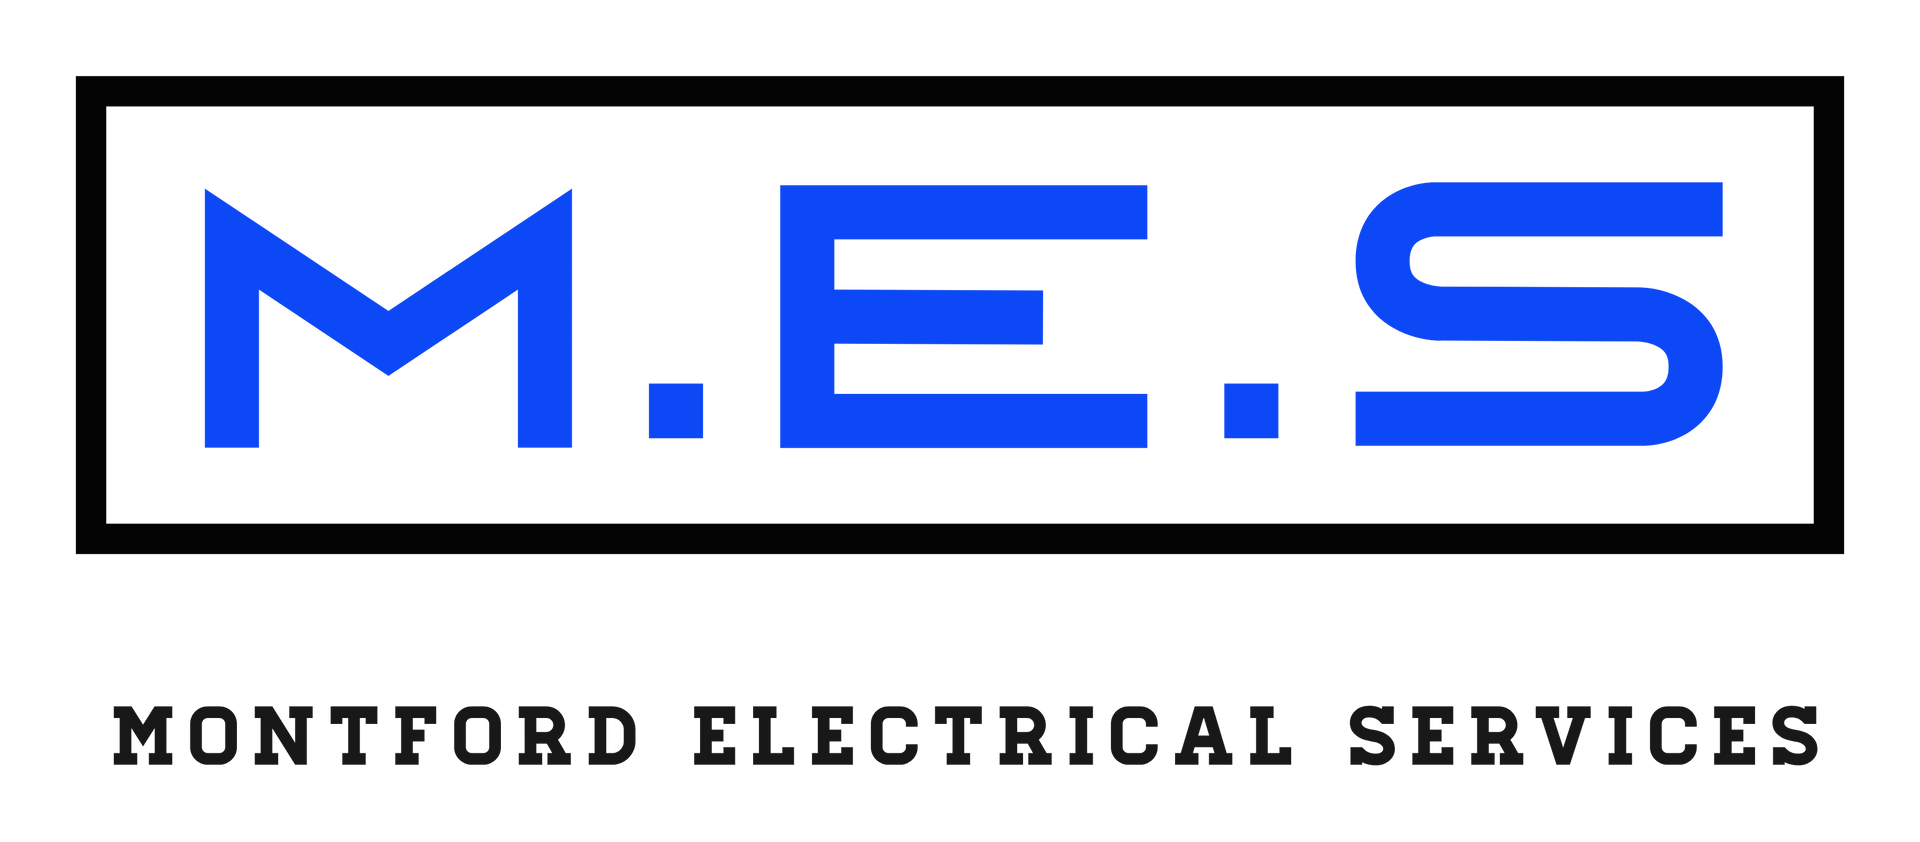 Montford Electrical Services